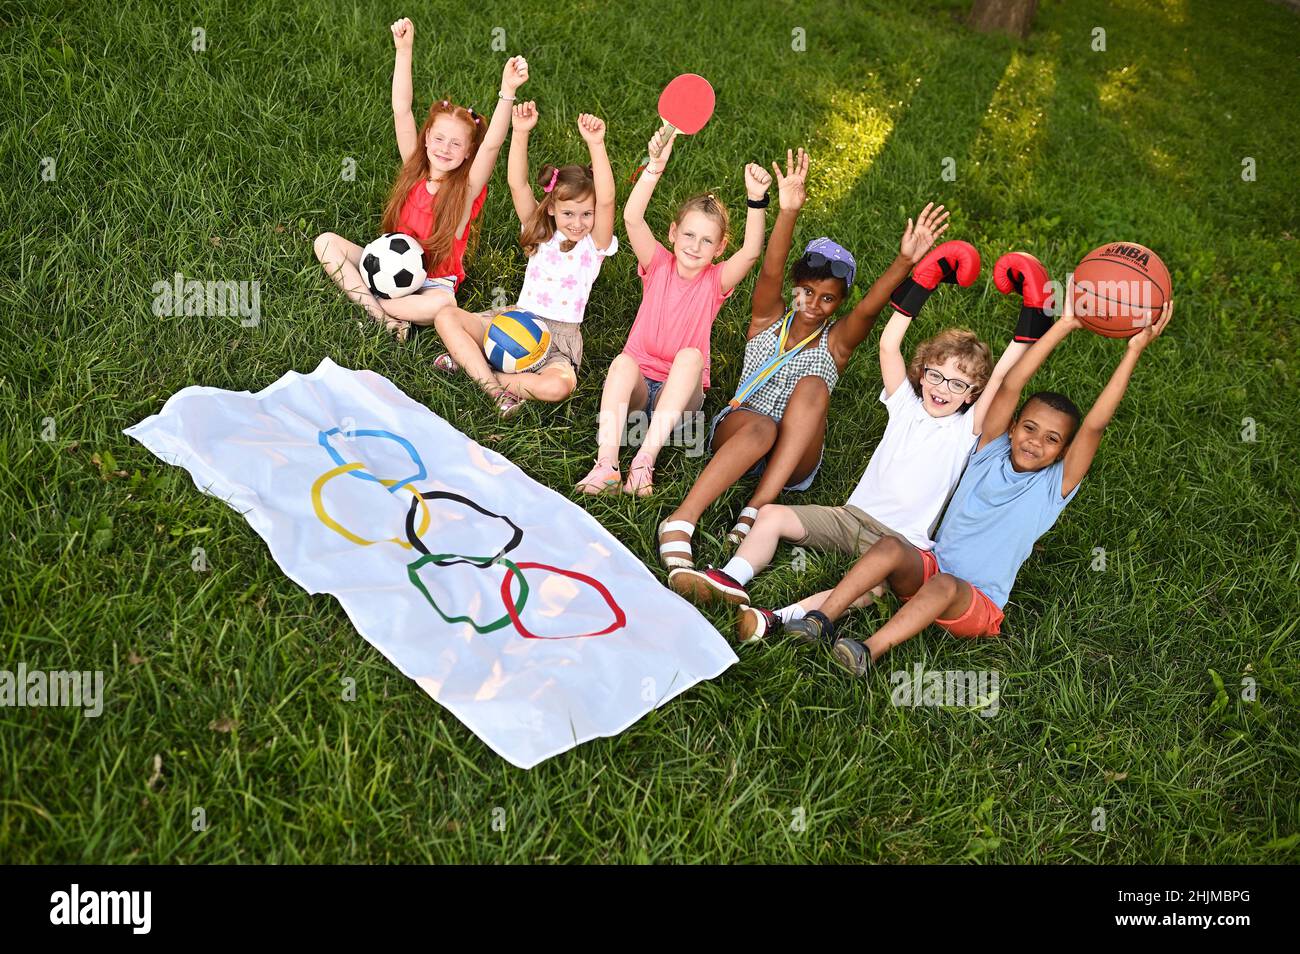 DONETSK, UKRAINE - JULY 10, 2021. Children of different nationalities with sports equipment in their hands are sitting on the grass against the Stock Photo